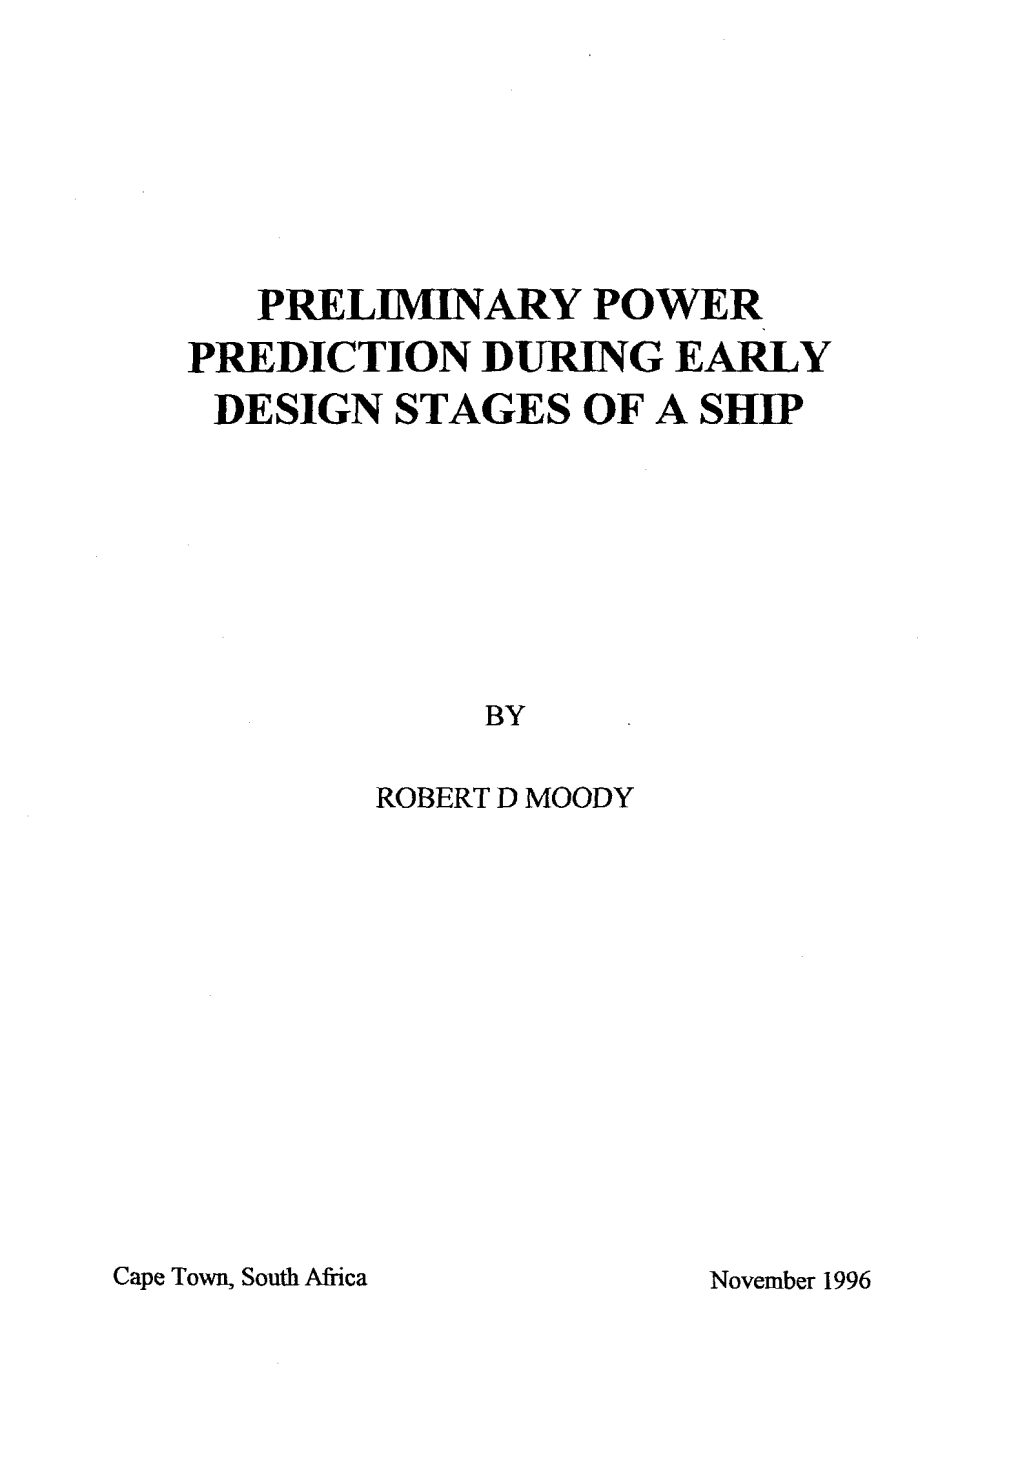 Preliminary Power Prediction During Early Design Stages of a Ship